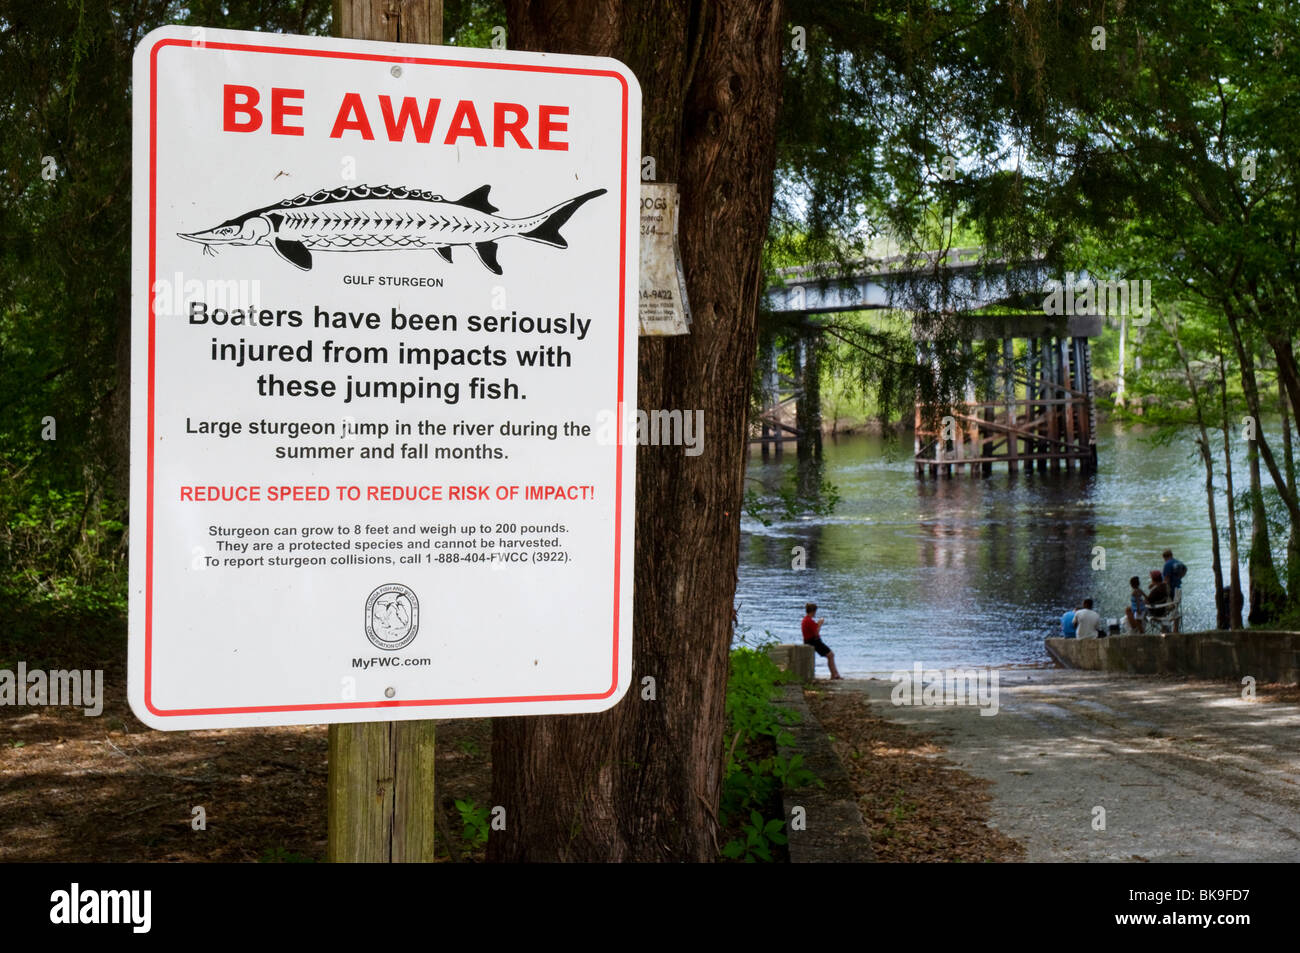 warning sign for boaters about jumping sturgeon fish along the Suwannee River in North Florida Stock Photo